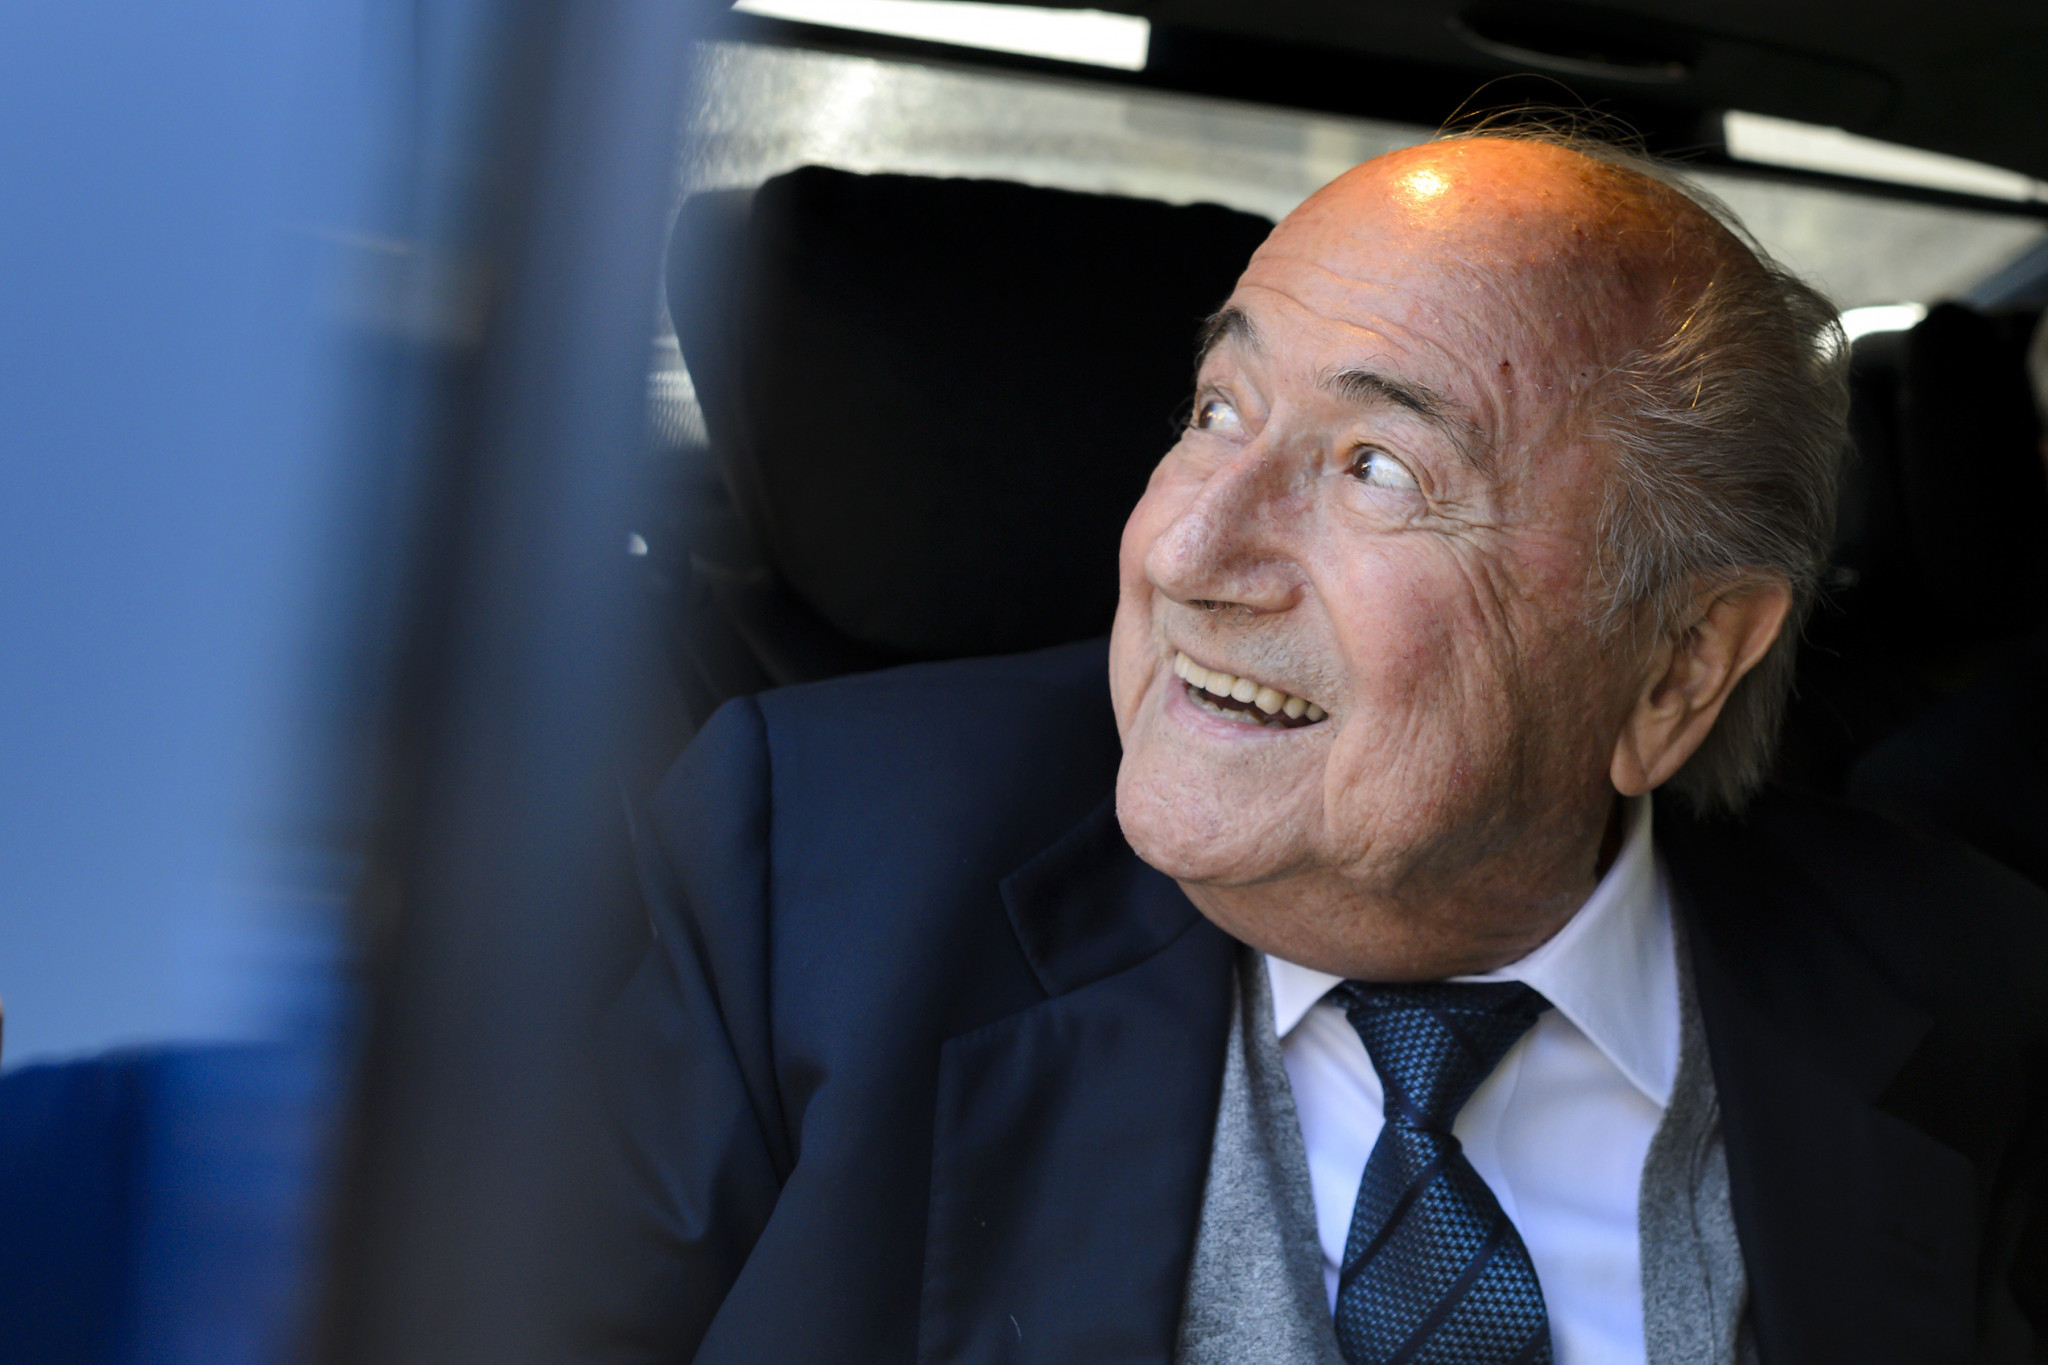 Sepp Blatter is serving a six year ban from all soccer-related duties imposed by FIFA's Ethics Committee ©Getty Images